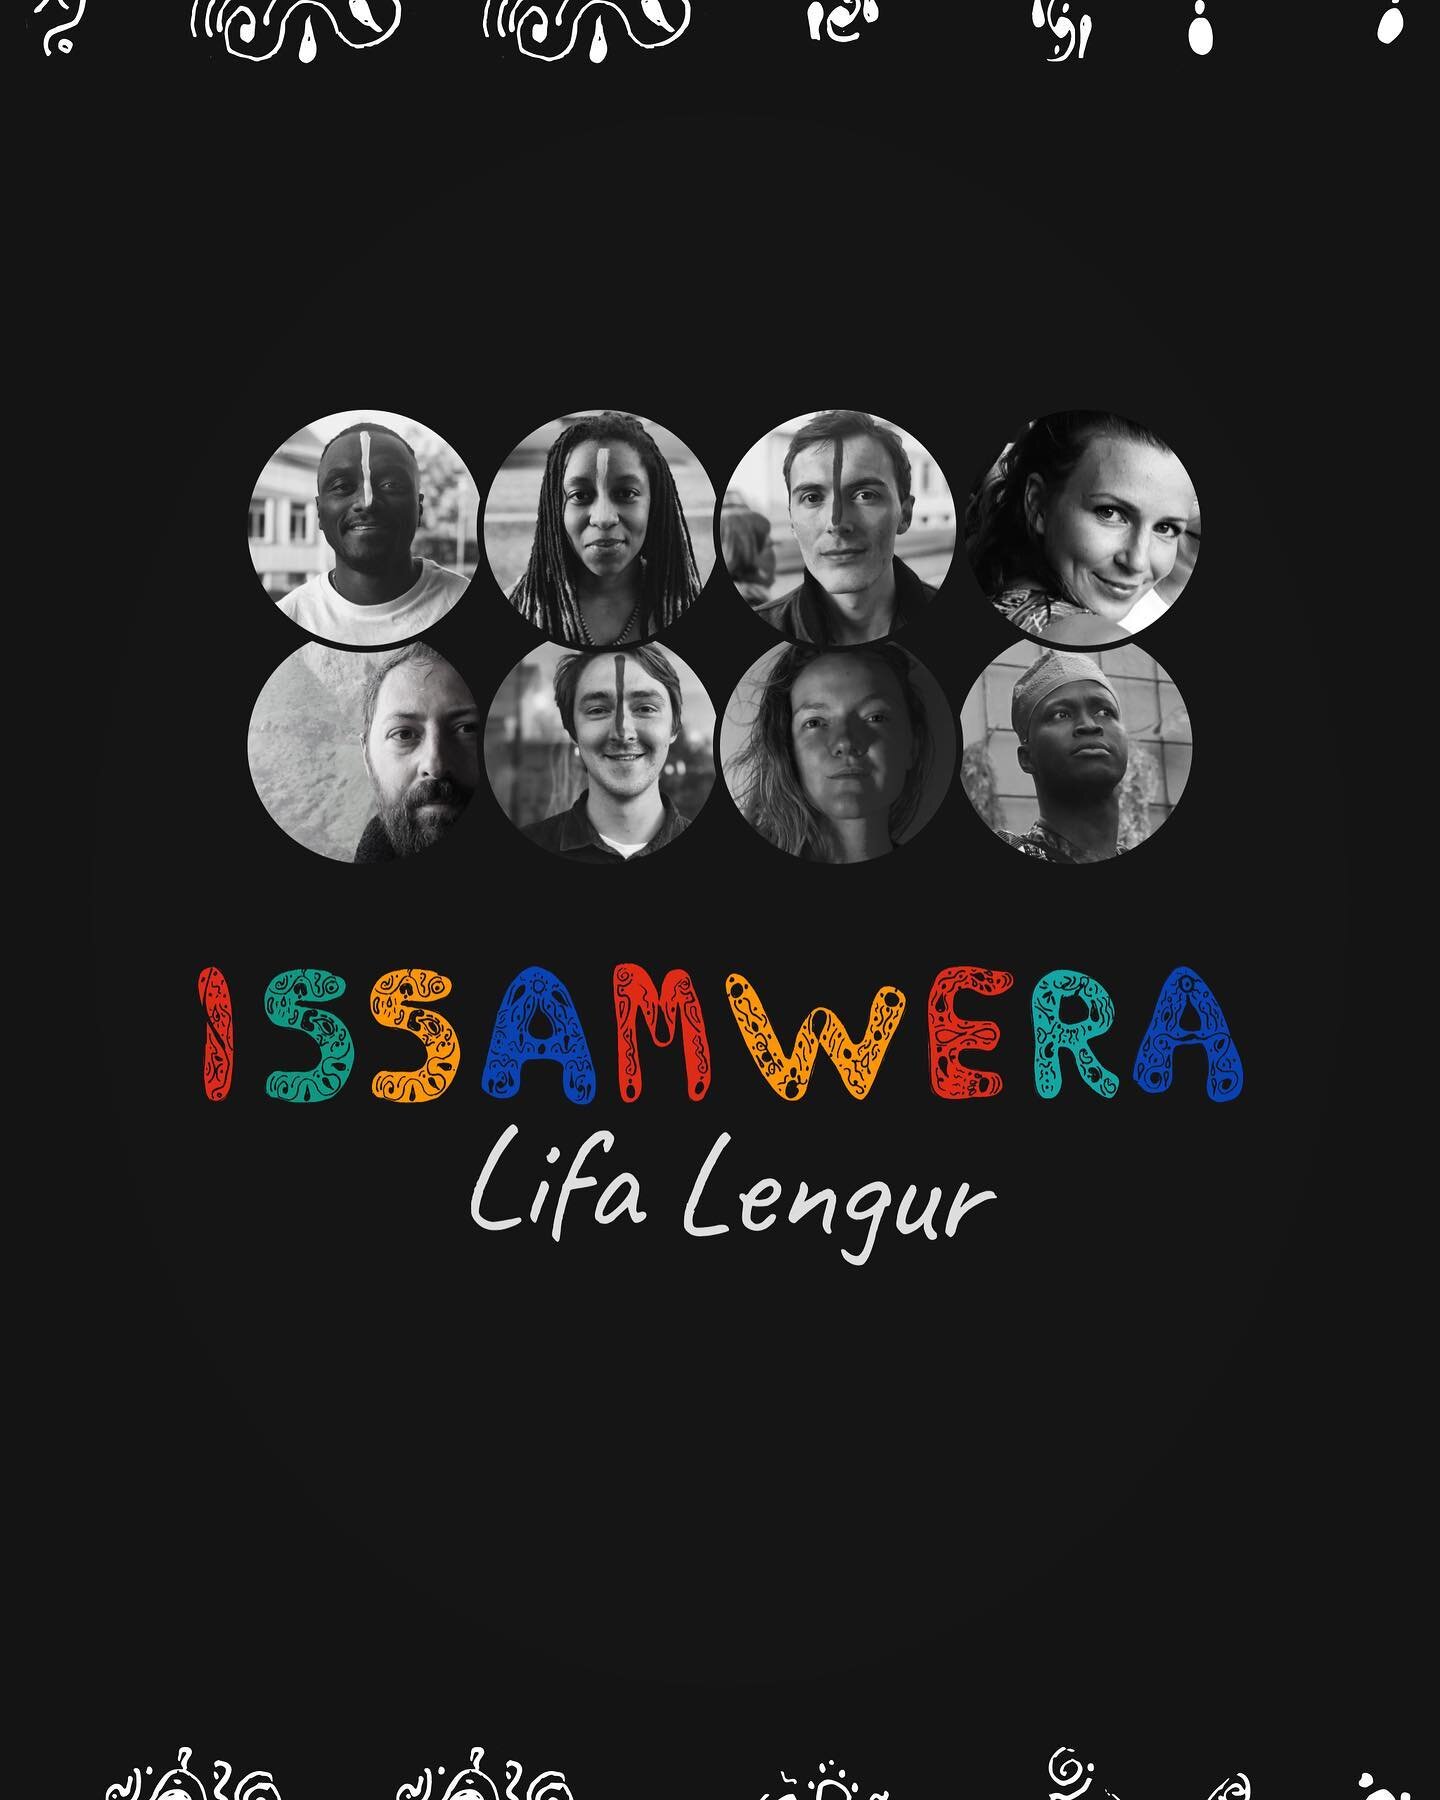 Today we release our second single Lifa Lengur which means Live Longer (Viva mais tempo)

This song is an essence of vitality, a gift from life, from us to you.

#welcome #livelonger #issamwera #monacethequeen #bantumusic #africanpolyrhythms #livemus